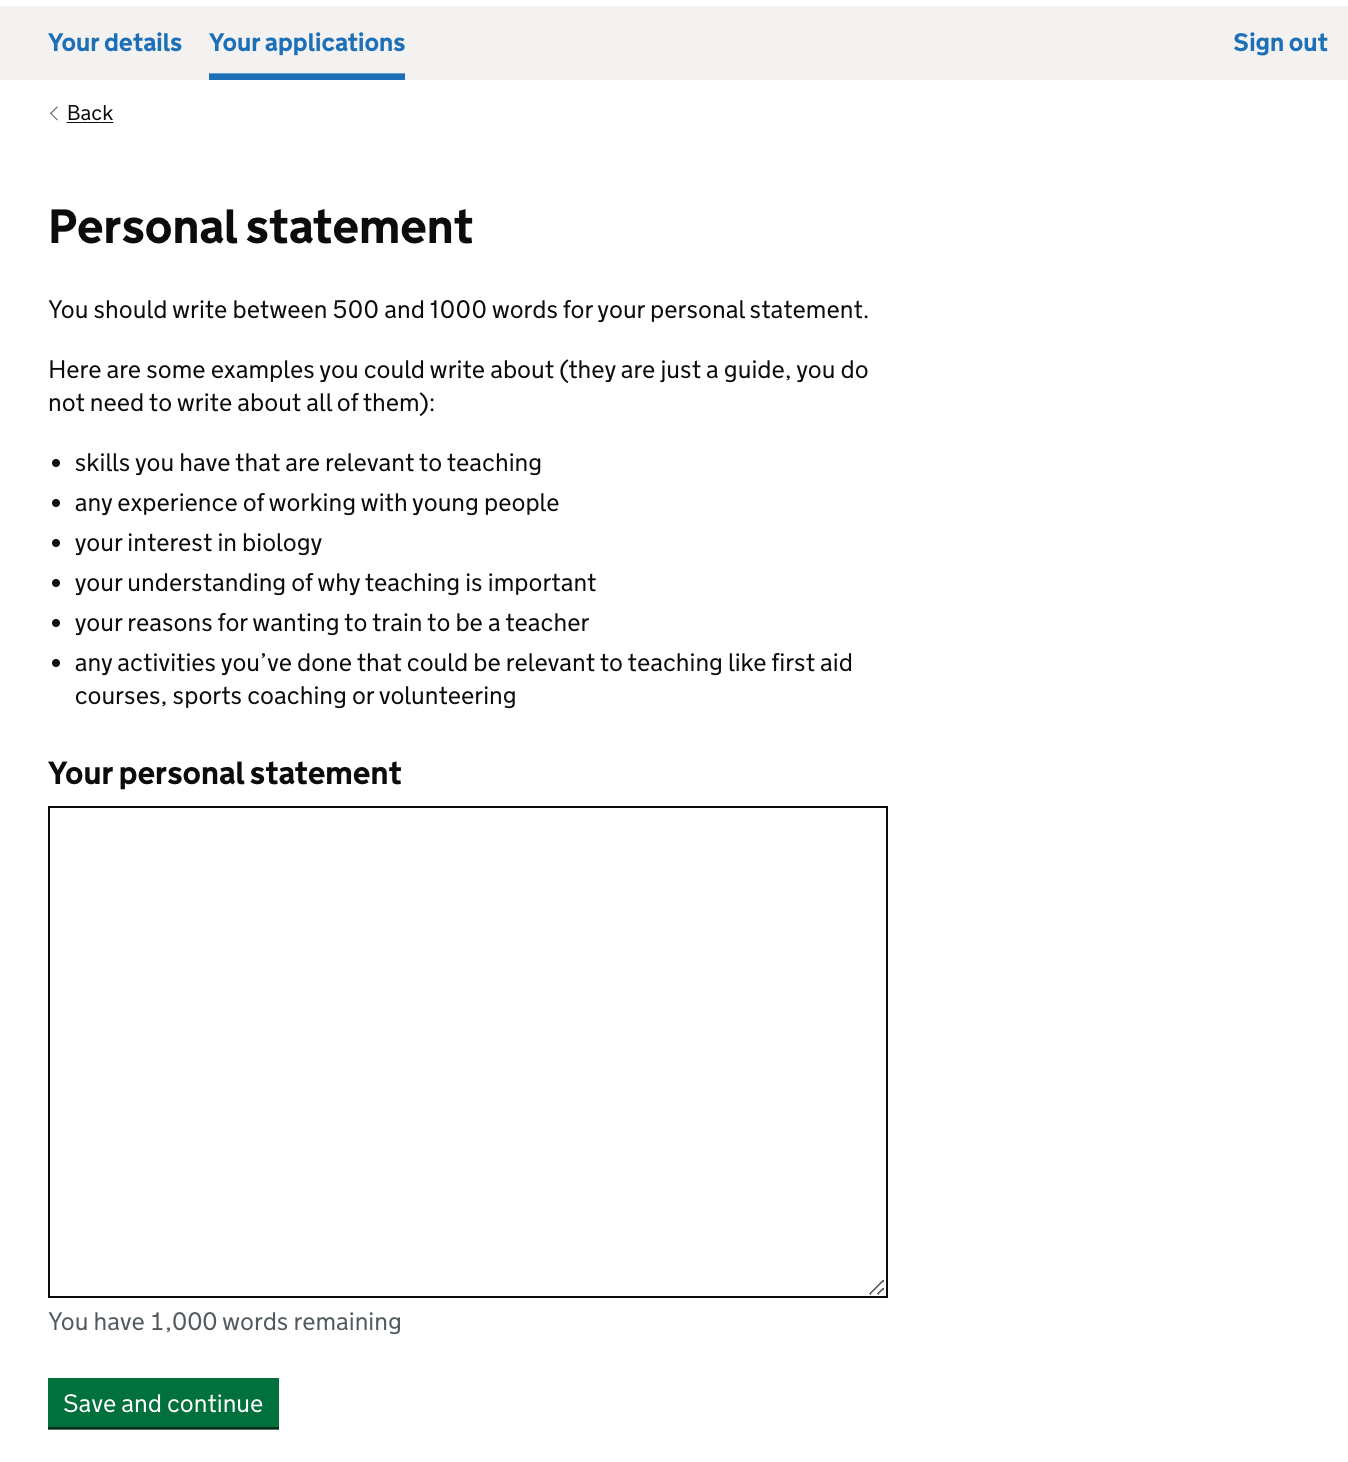 Screenshot of a page called 'Personal statement' this is followed by content explaing to the user what they should write about in their statement and a large text box to write it in.